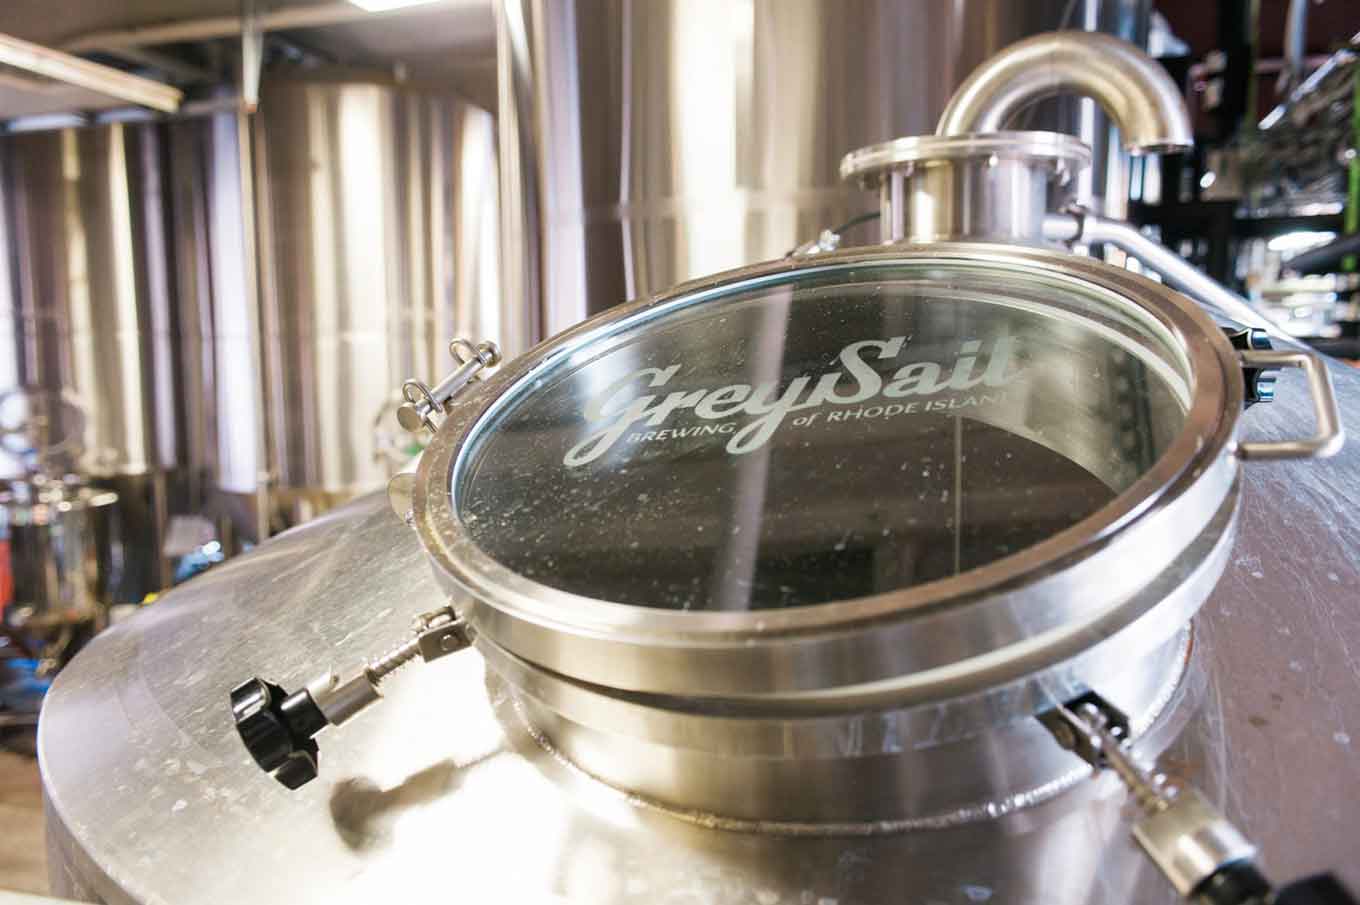 Grey Sail Brewing of Rhode Island, engraved on silver carbon capture technology in a brewery.